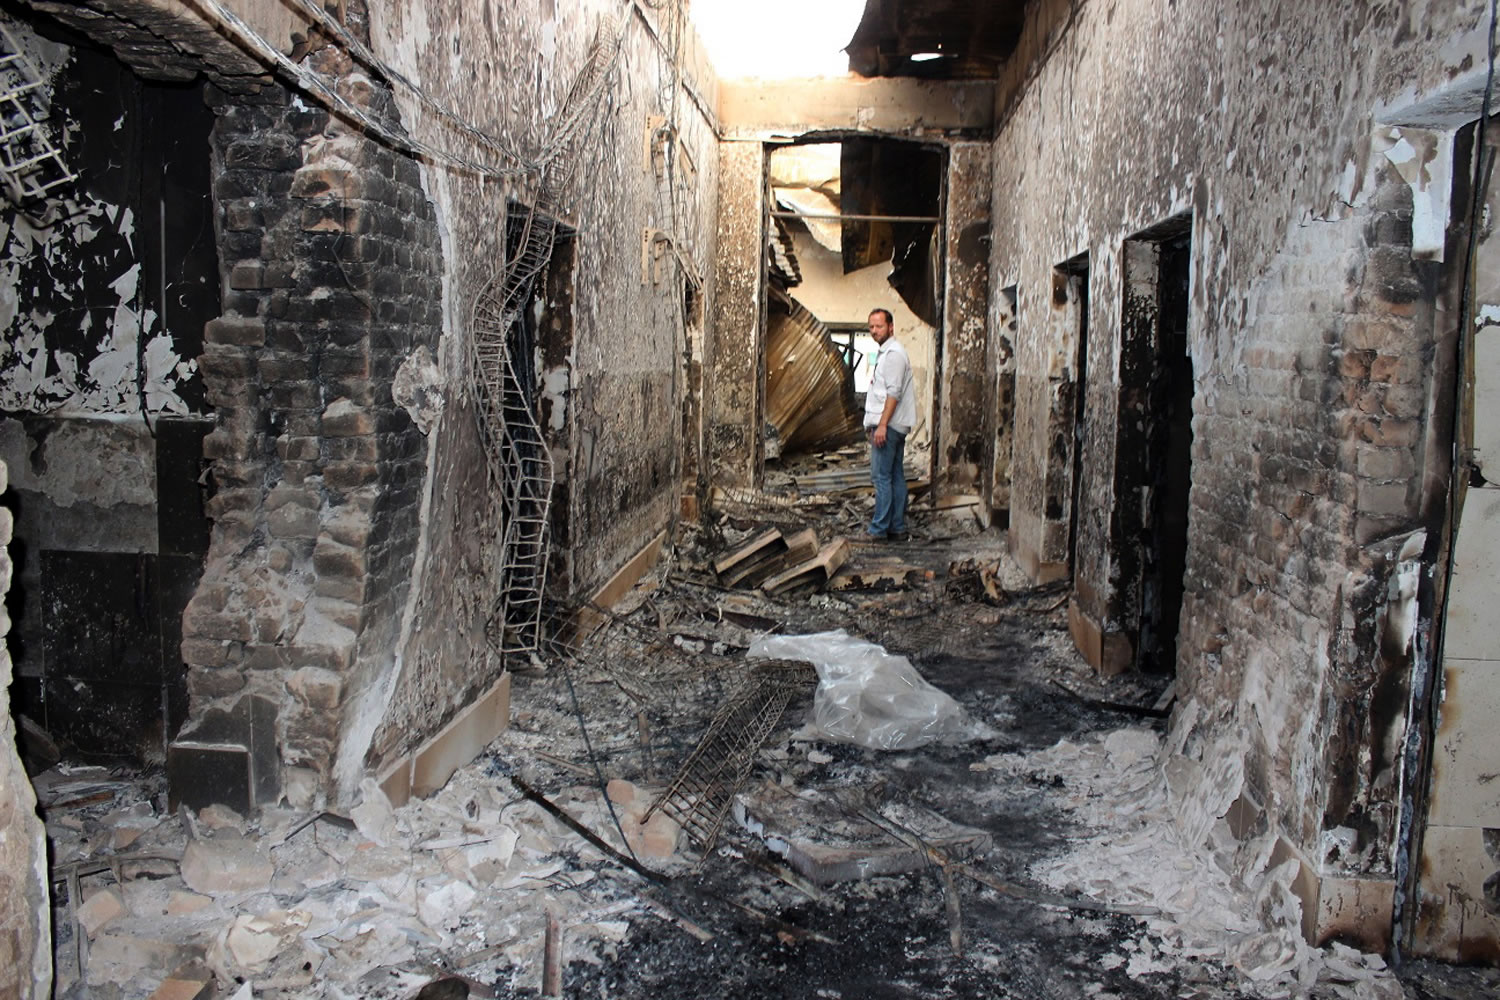 An employee of Doctors Without Borders stands inside the charred remains of its hospital in Kunduz, Afghanistan, on Oct. 16. The facility was hit by a U.S. airstrike on Oct. 3.